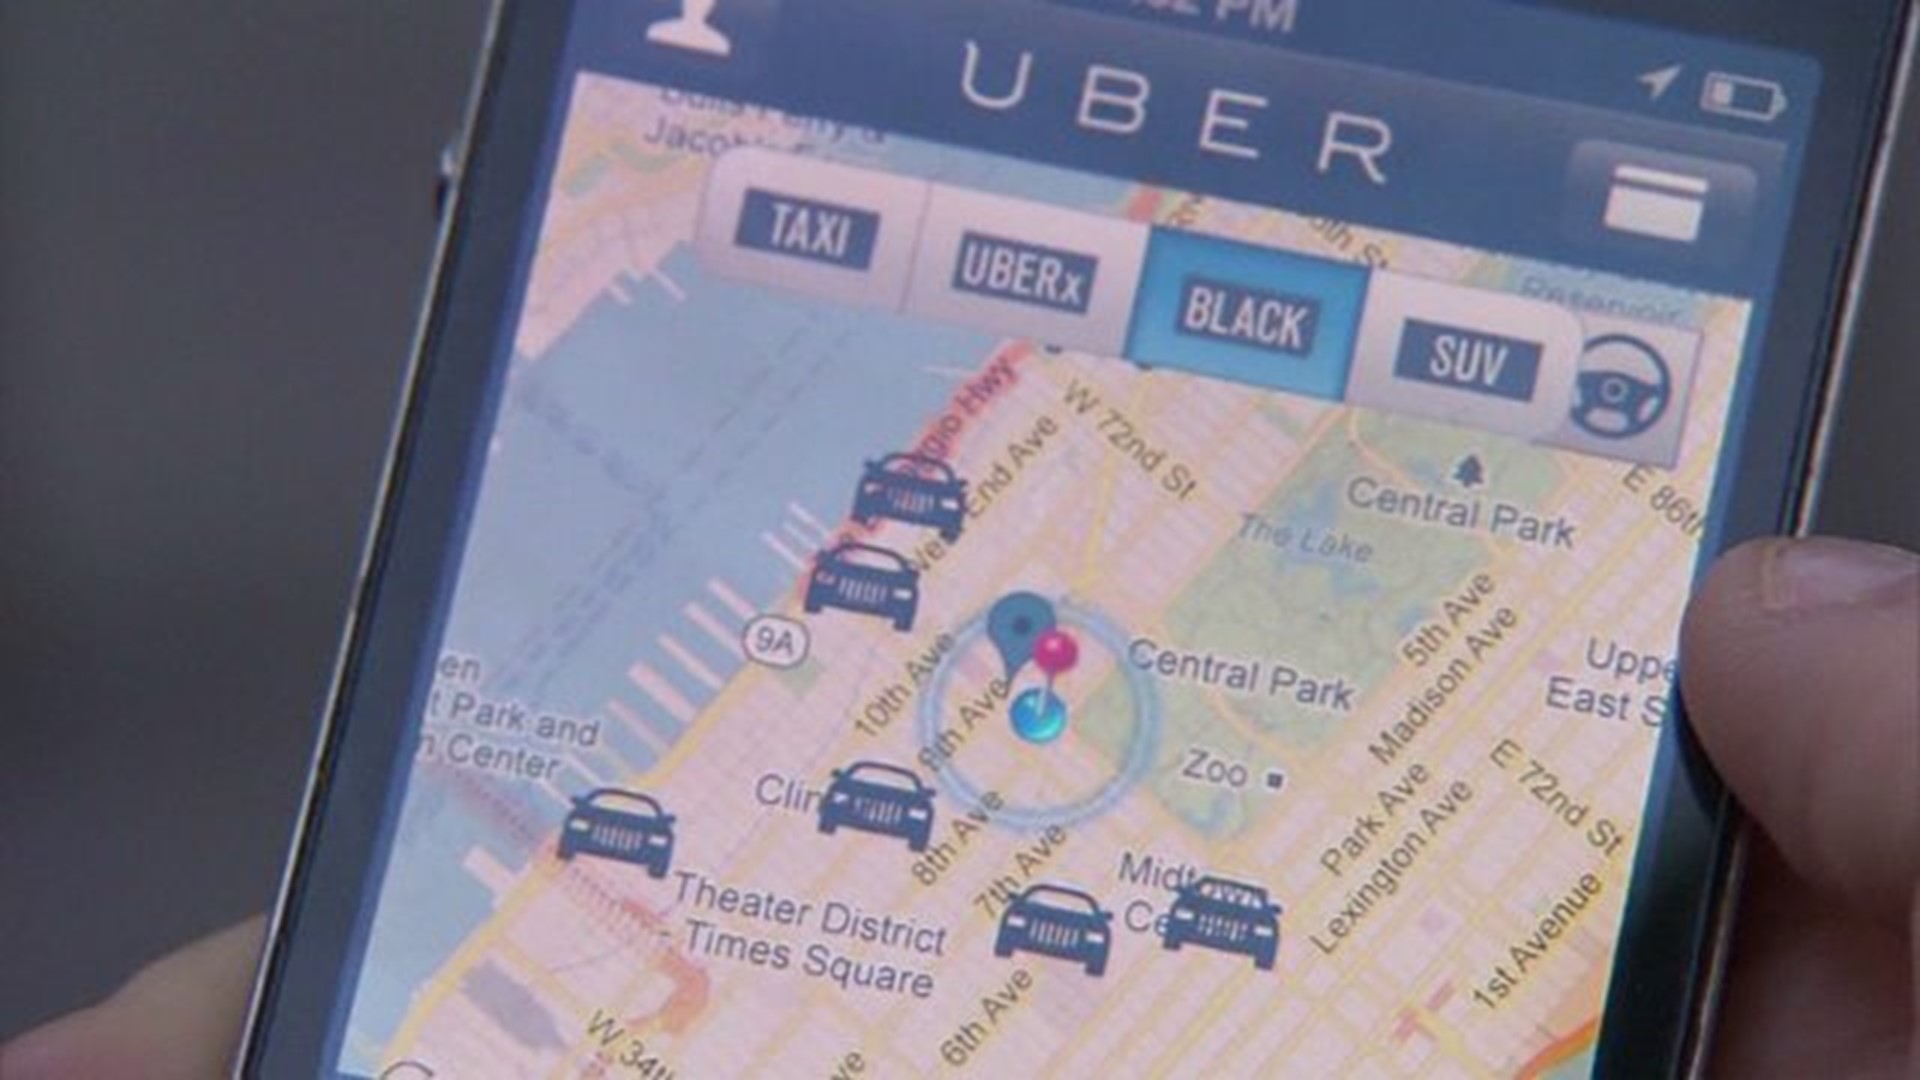 Uber driver service closer to coming to QC